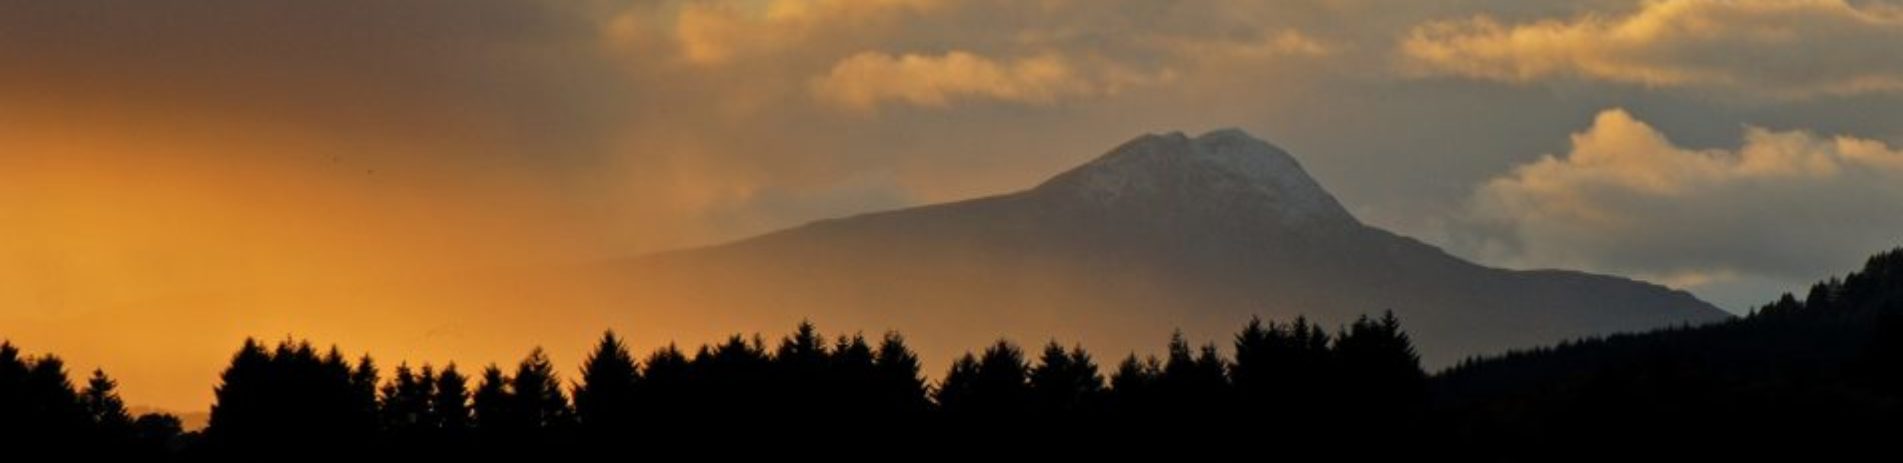 sunset-over-loch-forest-and-mountain-background